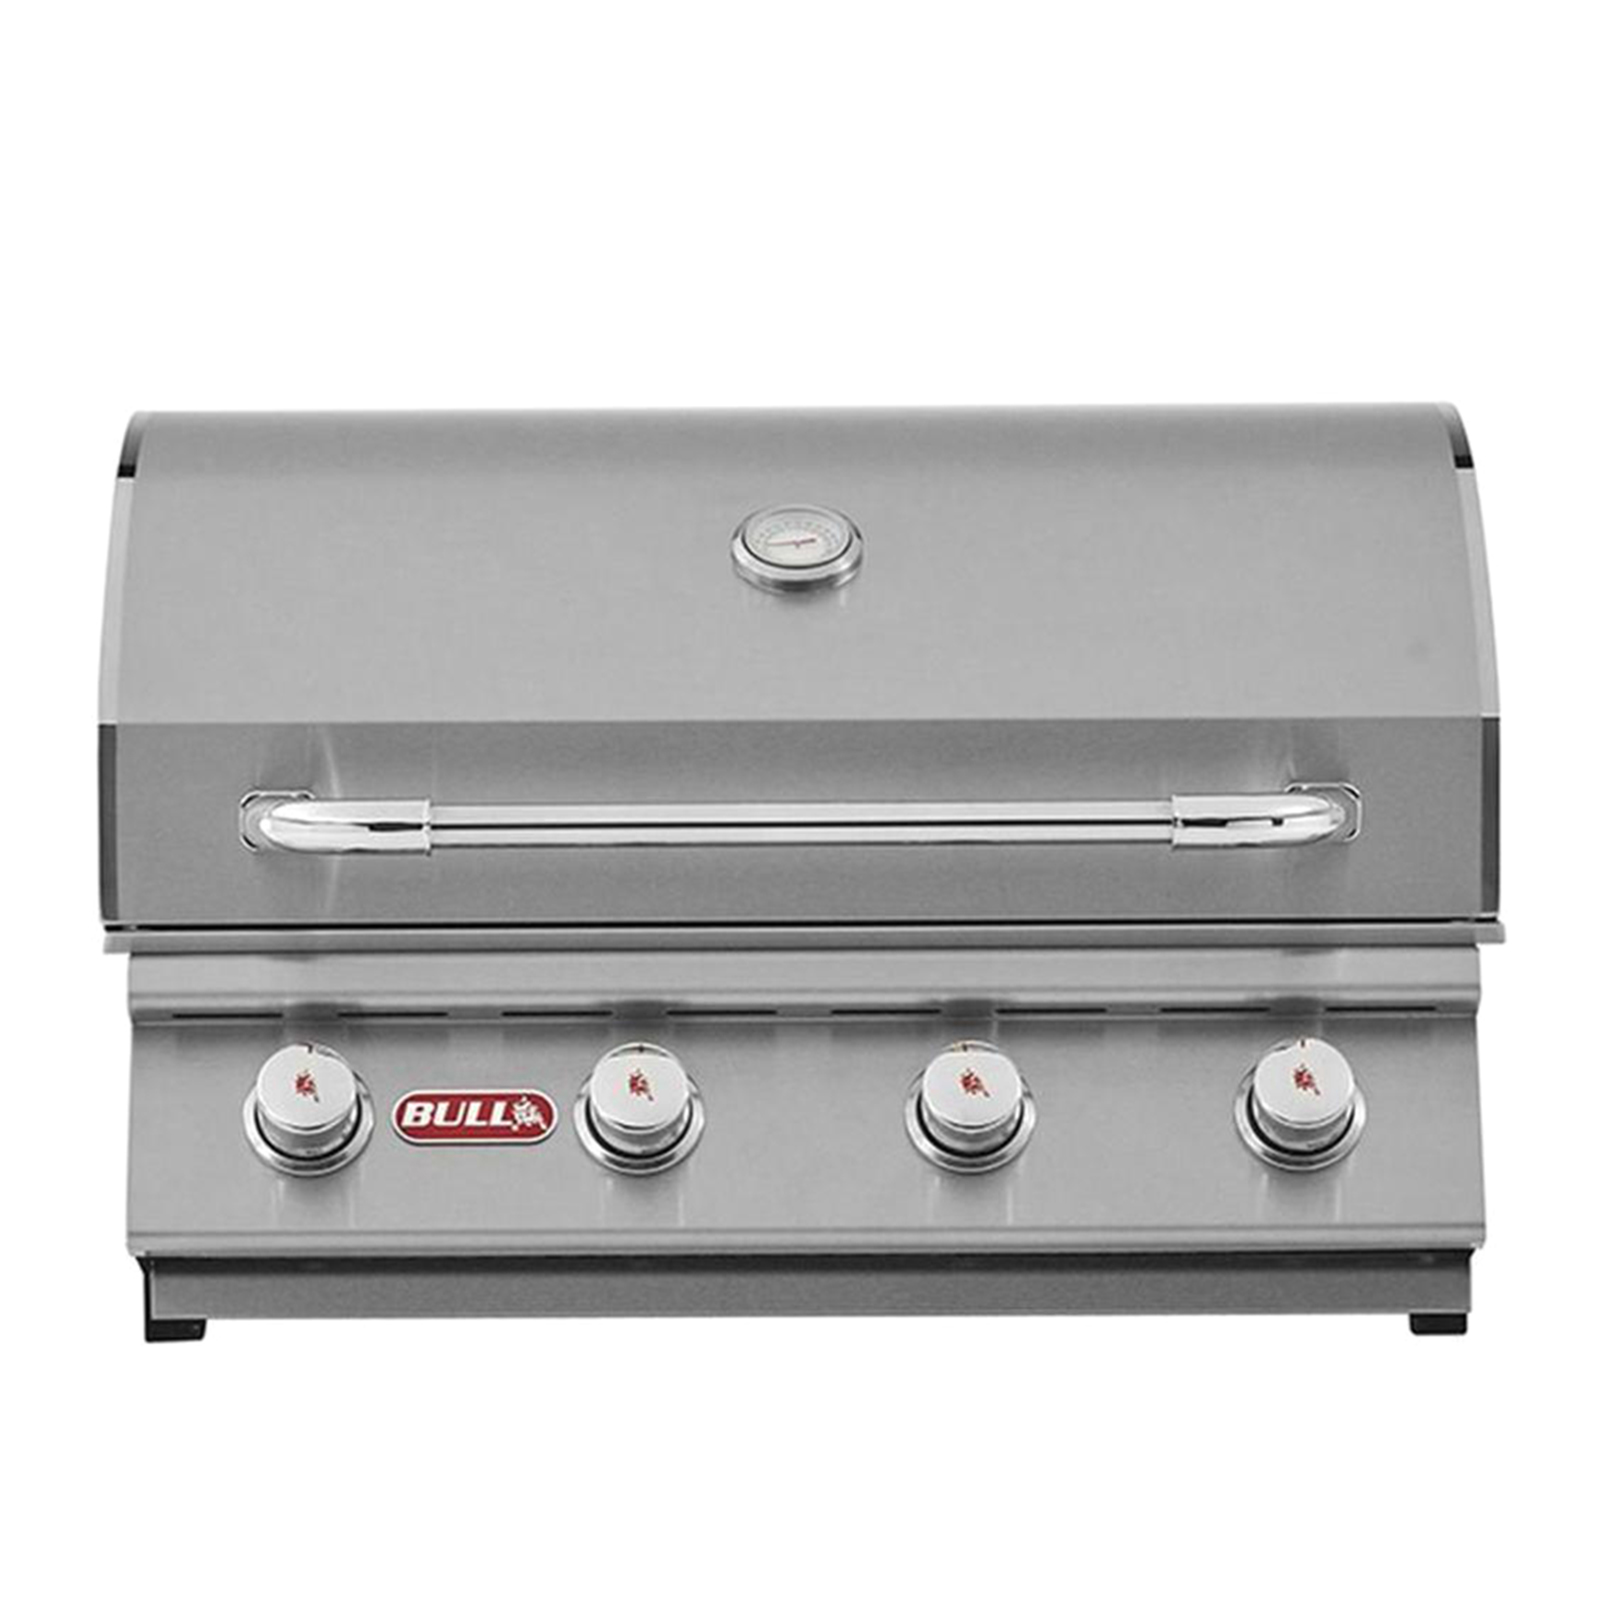 Bull Outdoor Products 26038 30" 4 Burner Propane Barbecue Grill